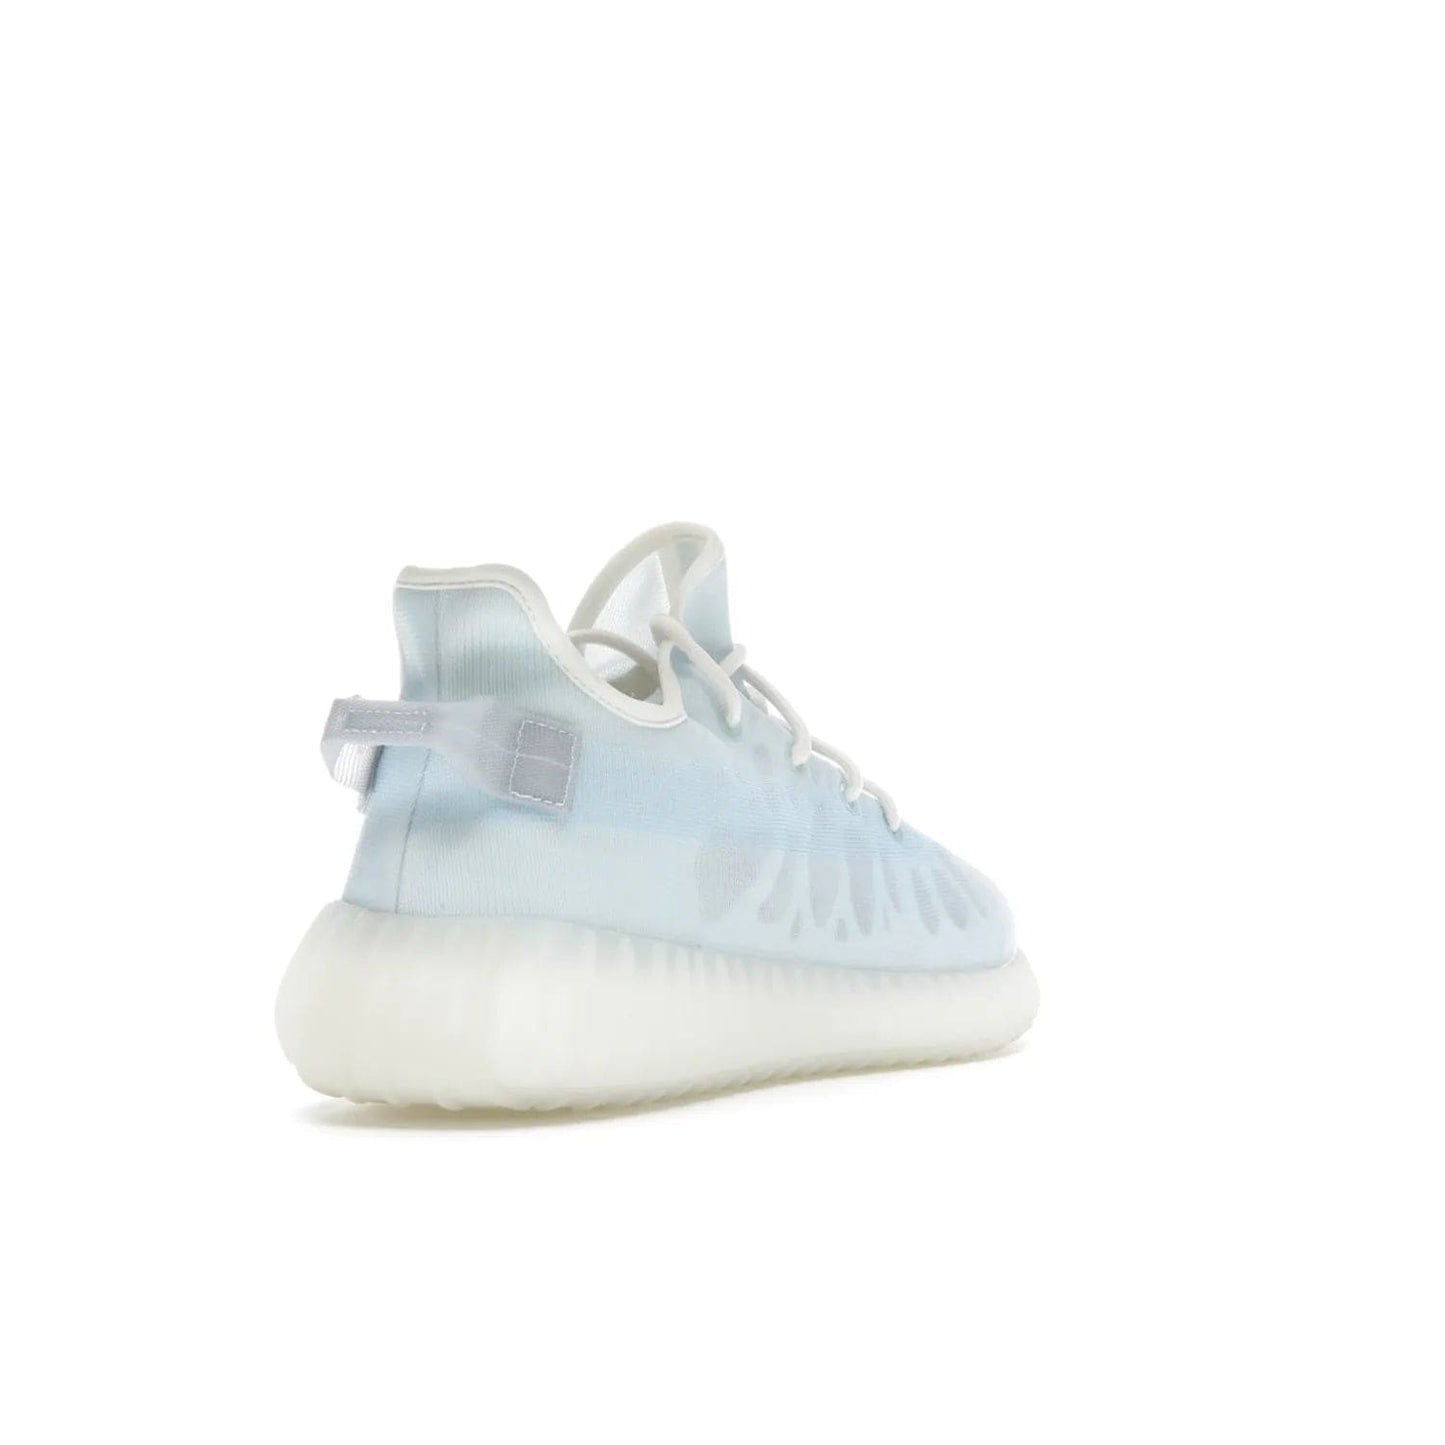 adidas Yeezy Boost 350 V2 Mono Ice - Image 31 - Only at www.BallersClubKickz.com - Introducing the adidas Yeezy 350 V2 Mono Ice - a sleek monofilament mesh design in Ice blue with Boost sole and heel pull tab. Released exclusively in the US for $220.